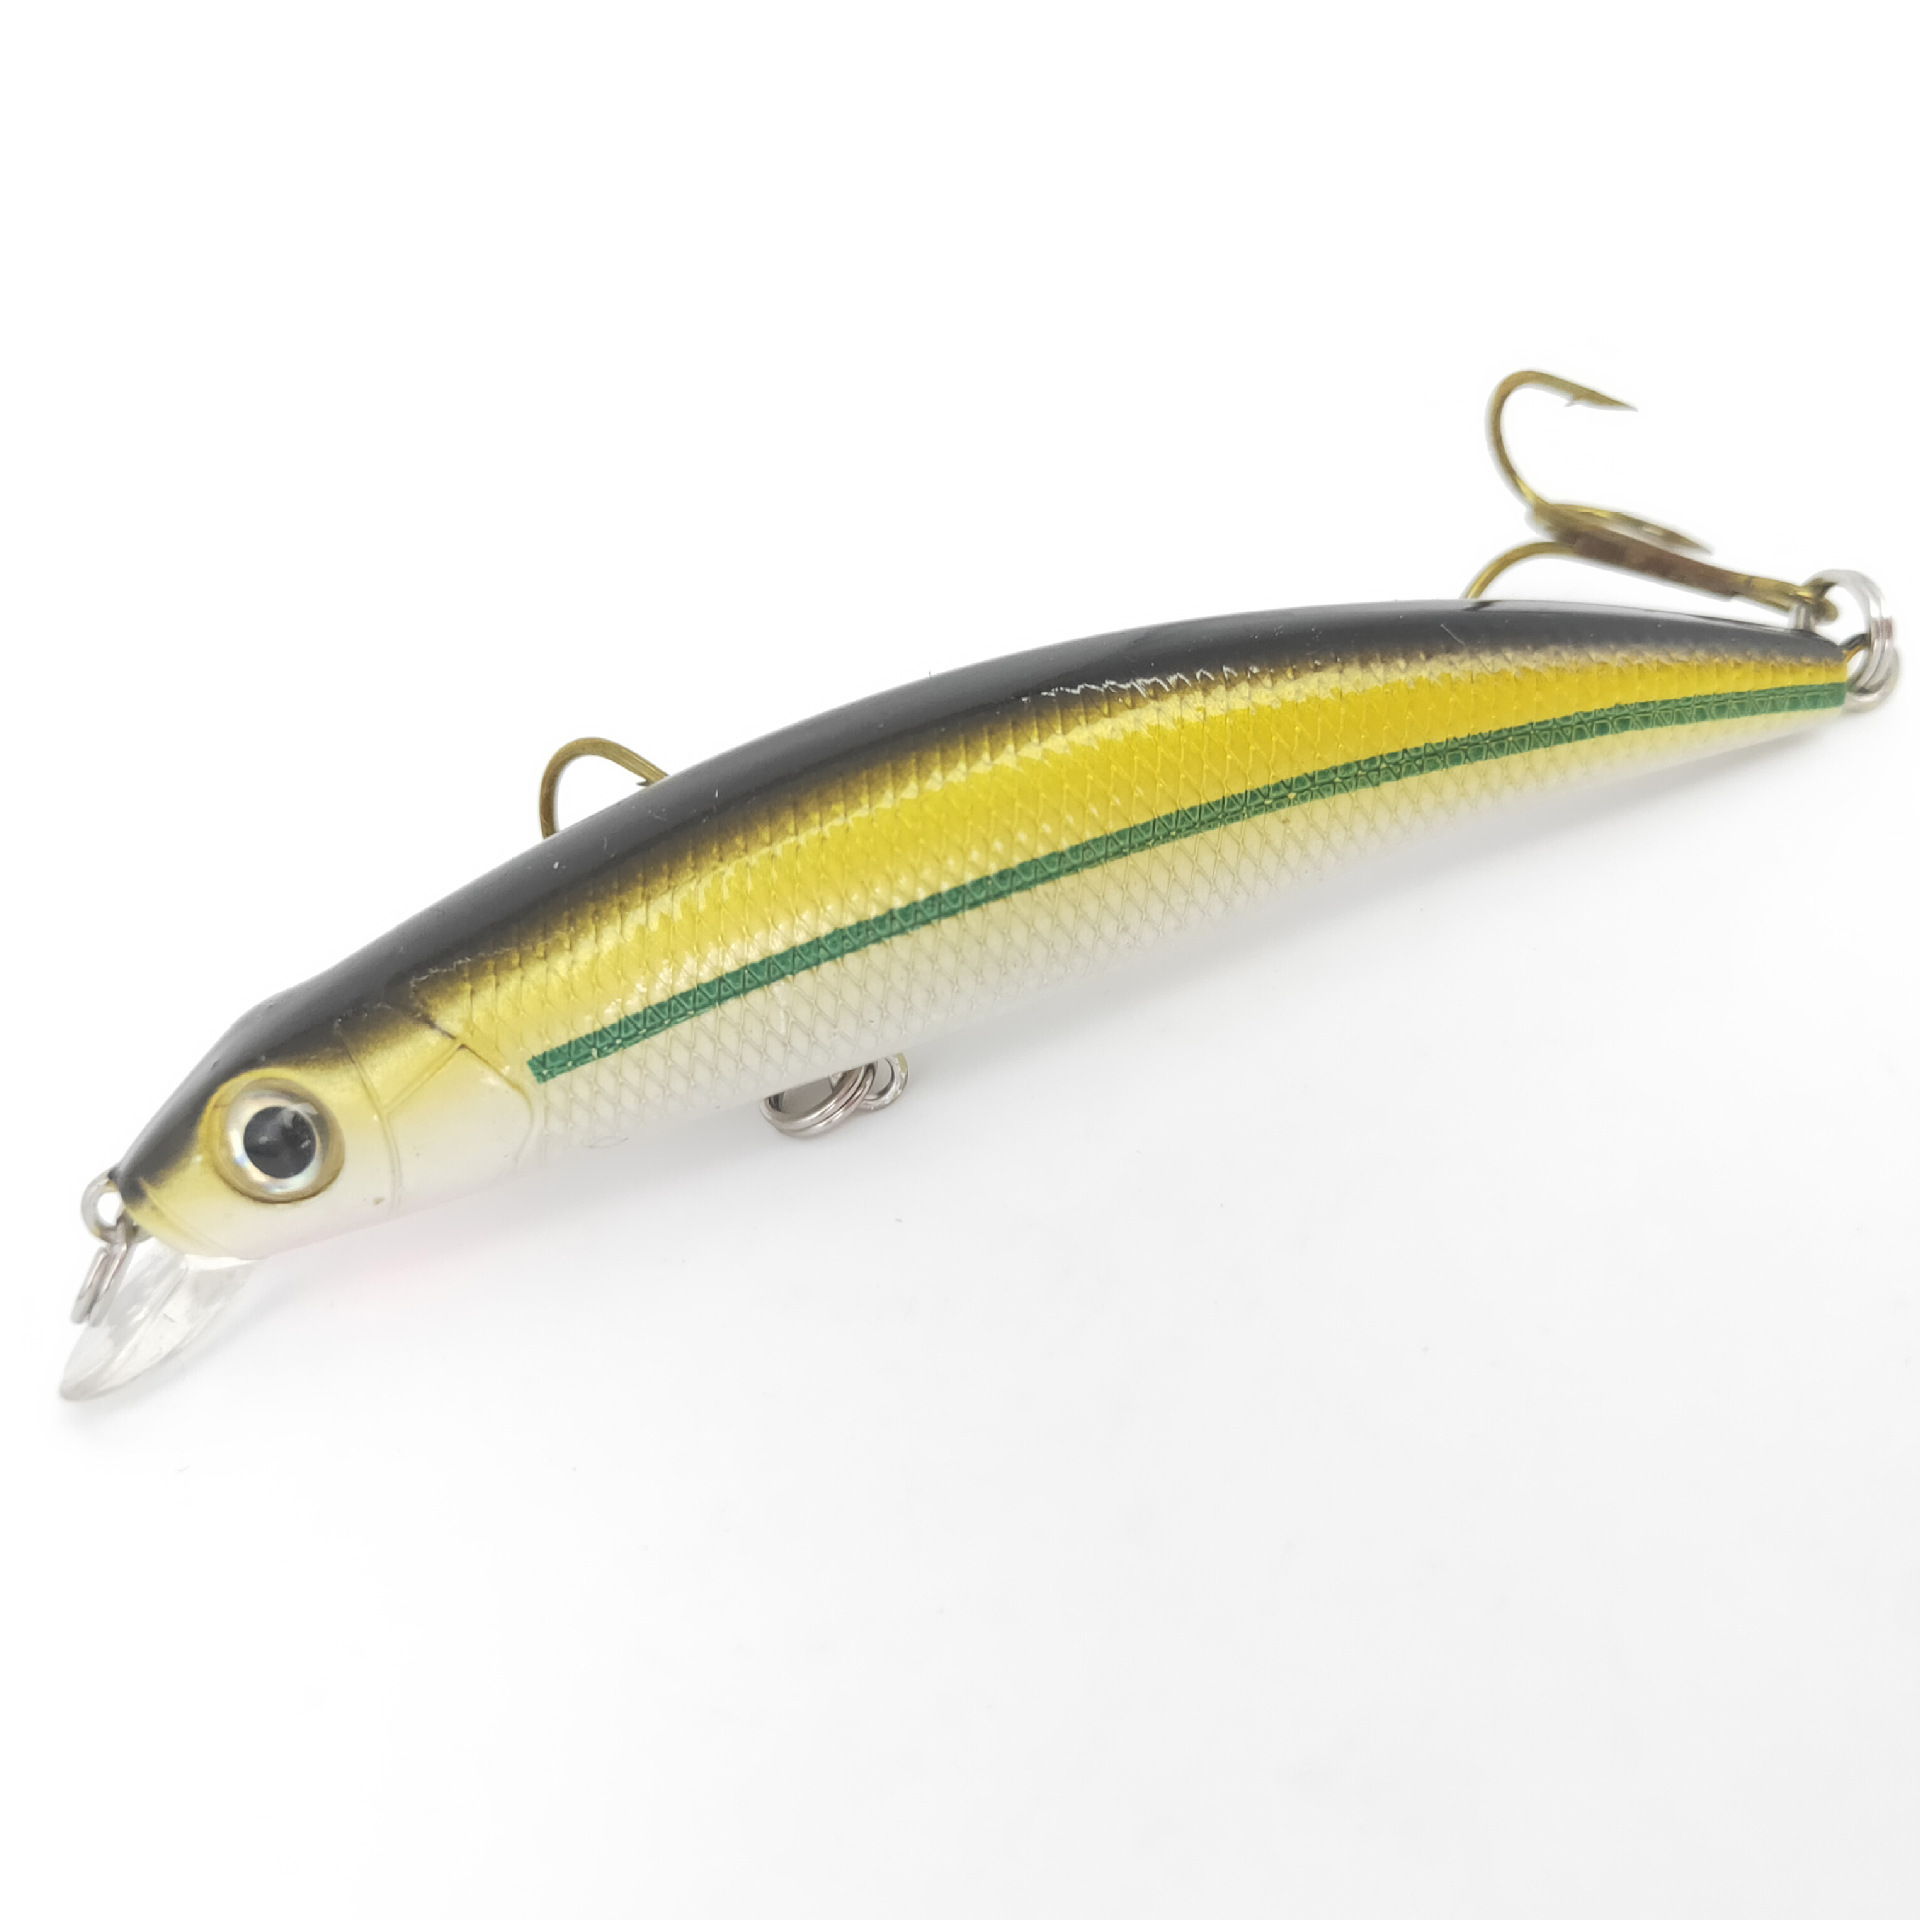 4 Colors Sinking Minnow Fishing Lures Hard Plastic Minnow Baits Bass Trout Fresh Water Fishing Lure